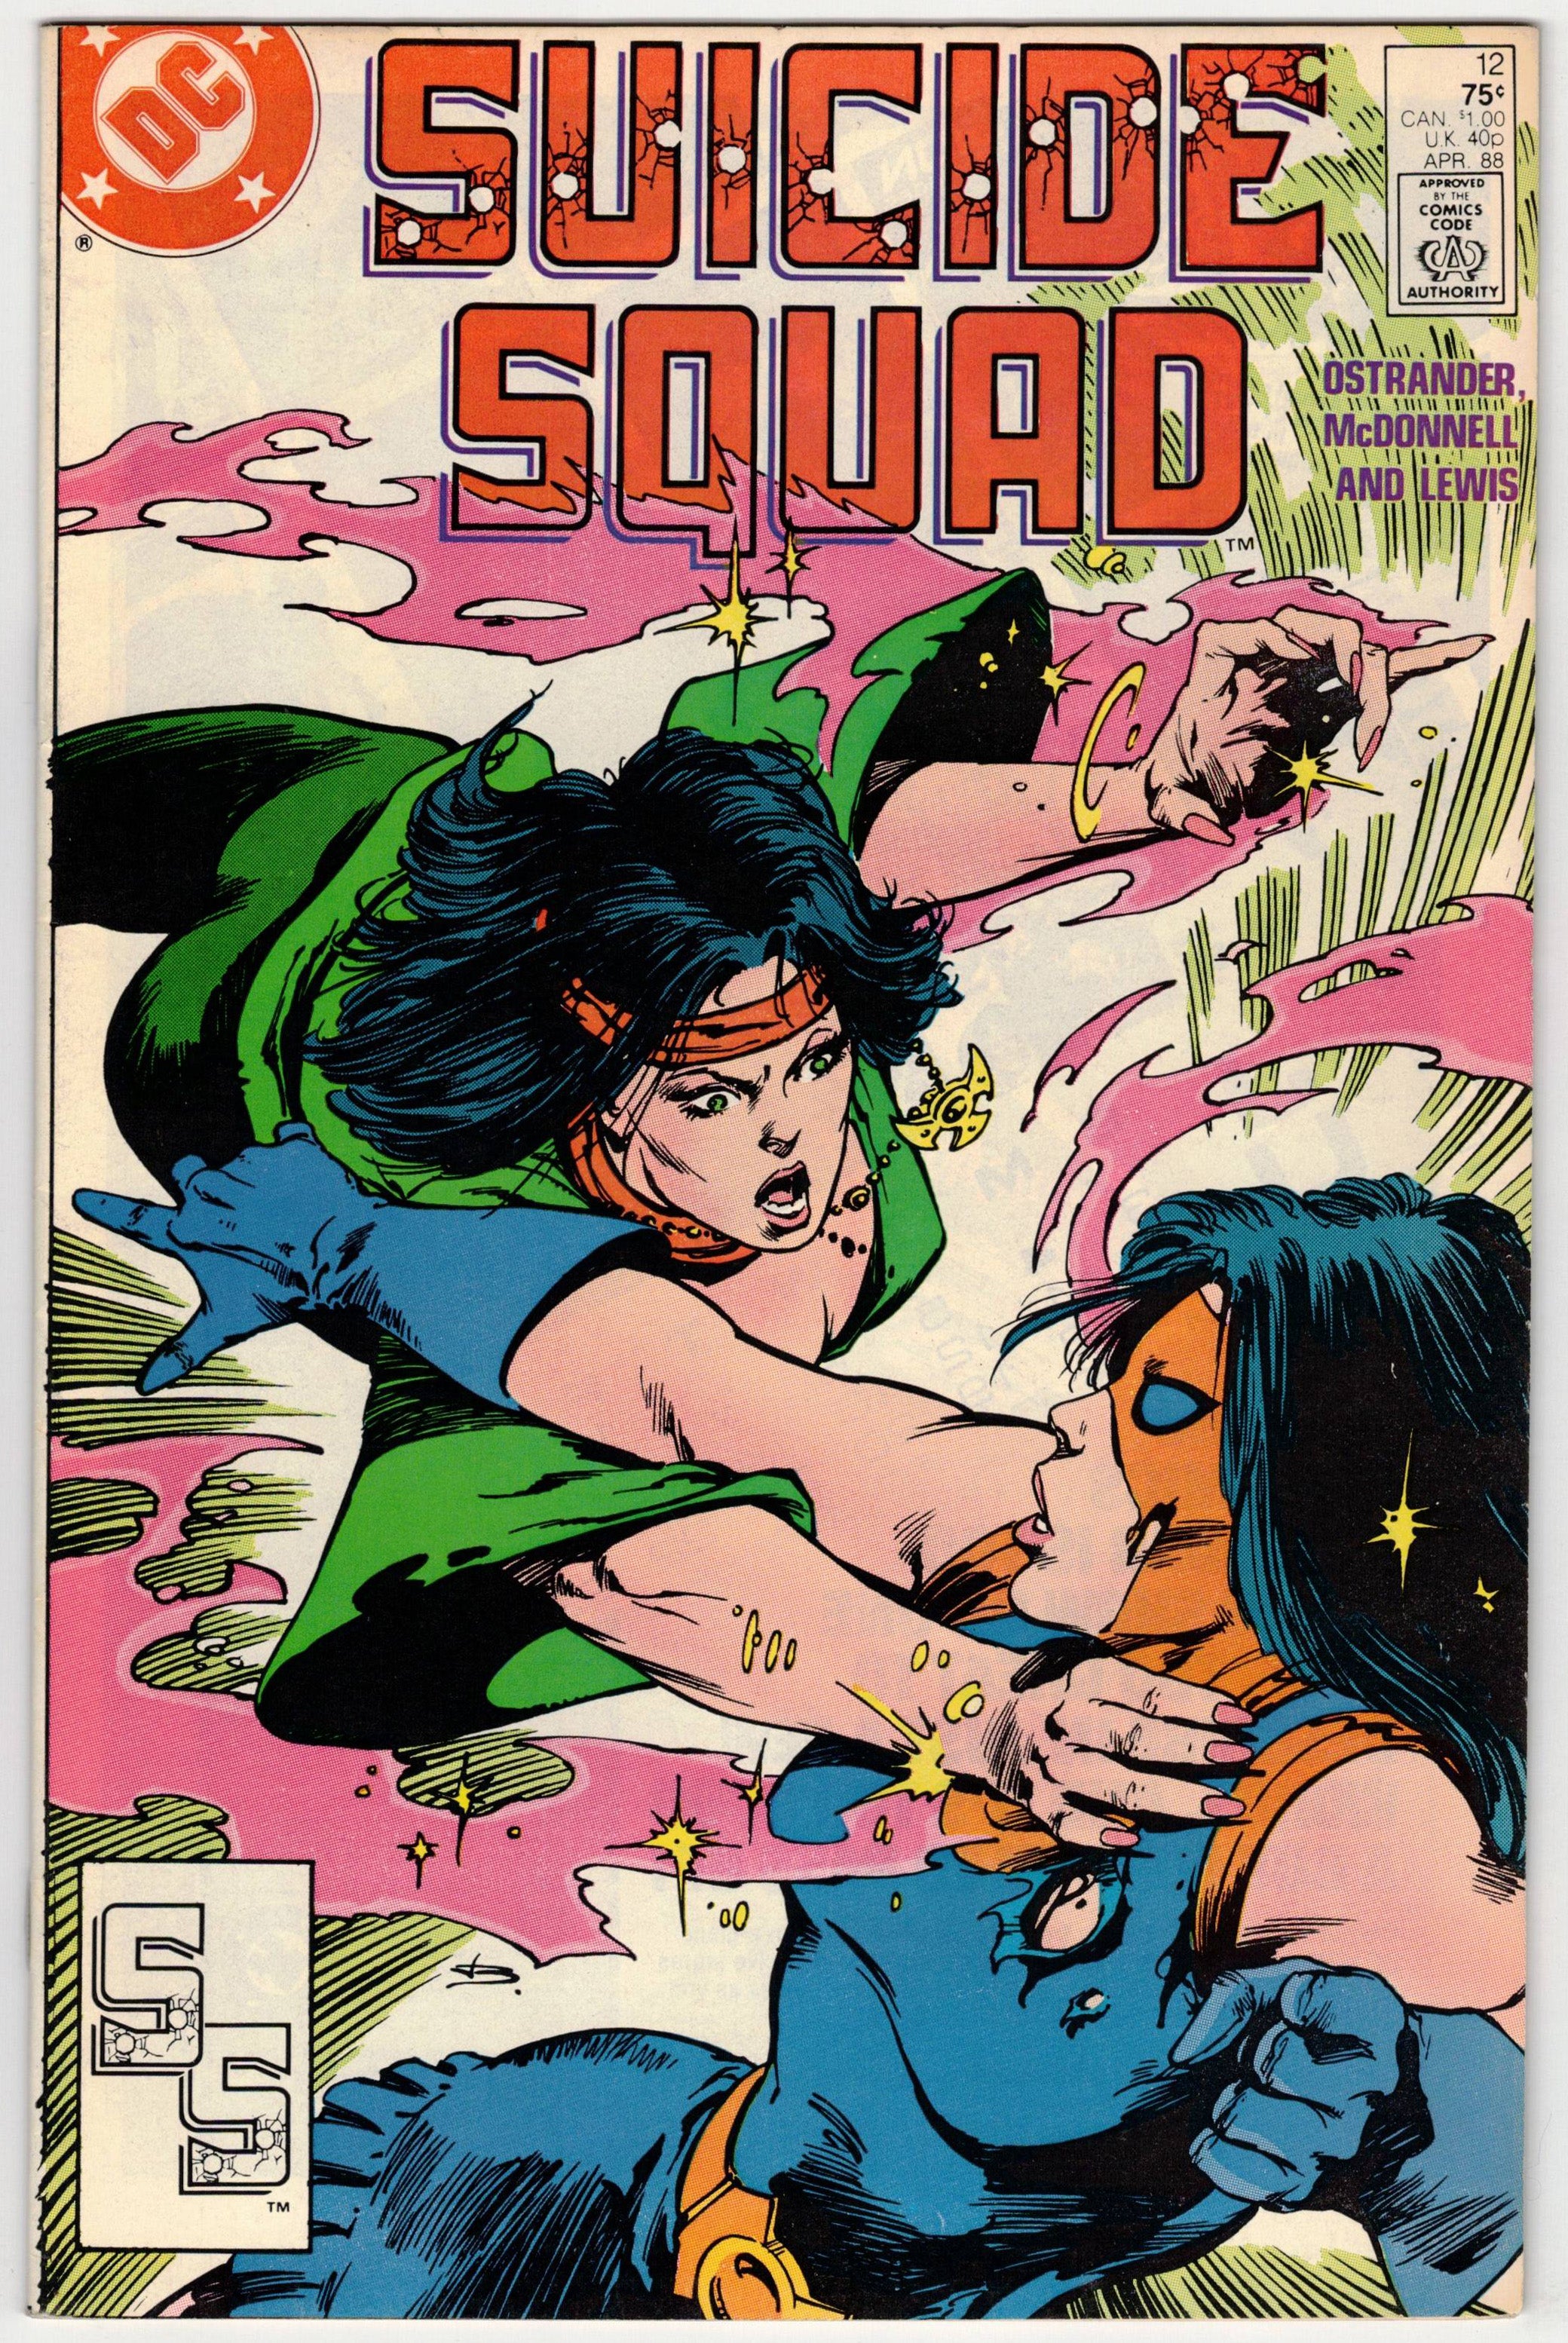 Photo of Suicide Squad, Vol. 1 (1988)  Issue 12  Comic sold by Stronghold Collectibles